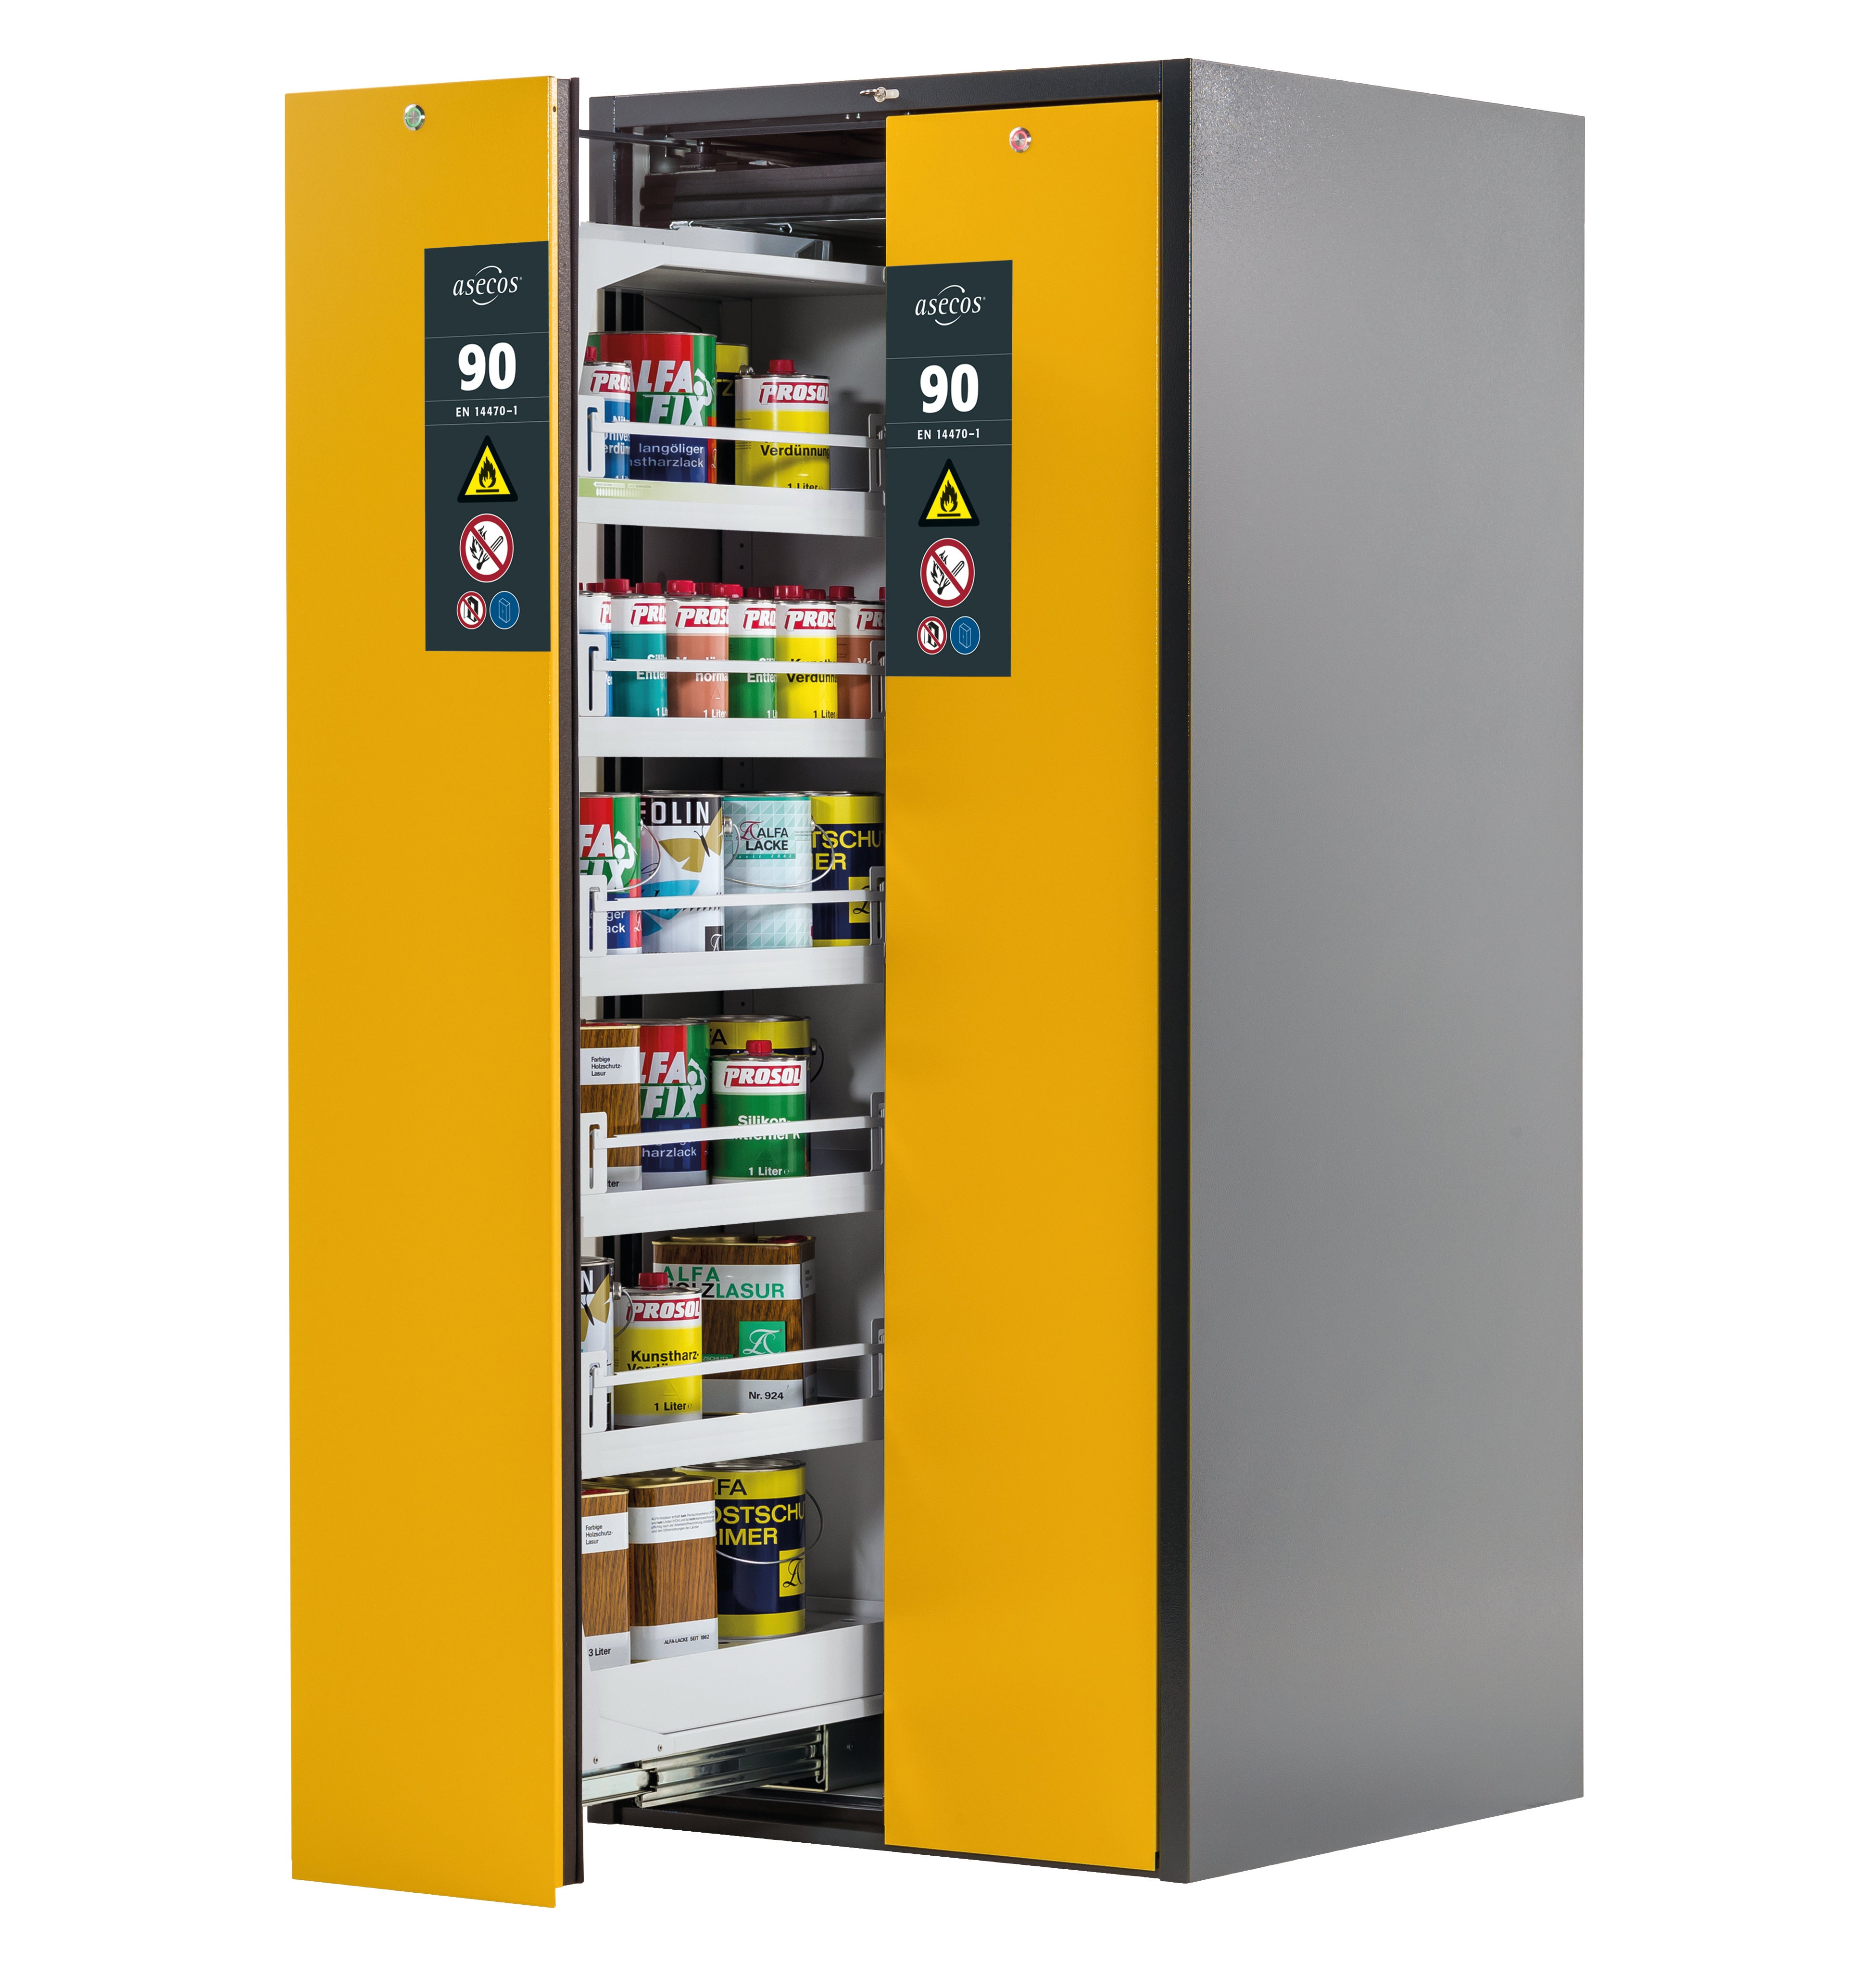 Type 90 safety cabinet V-MOVE-90 model V90.196.081.VDAC:0013 in safety yellow RAL 1004 with 5x standard tray base (sheet steel)